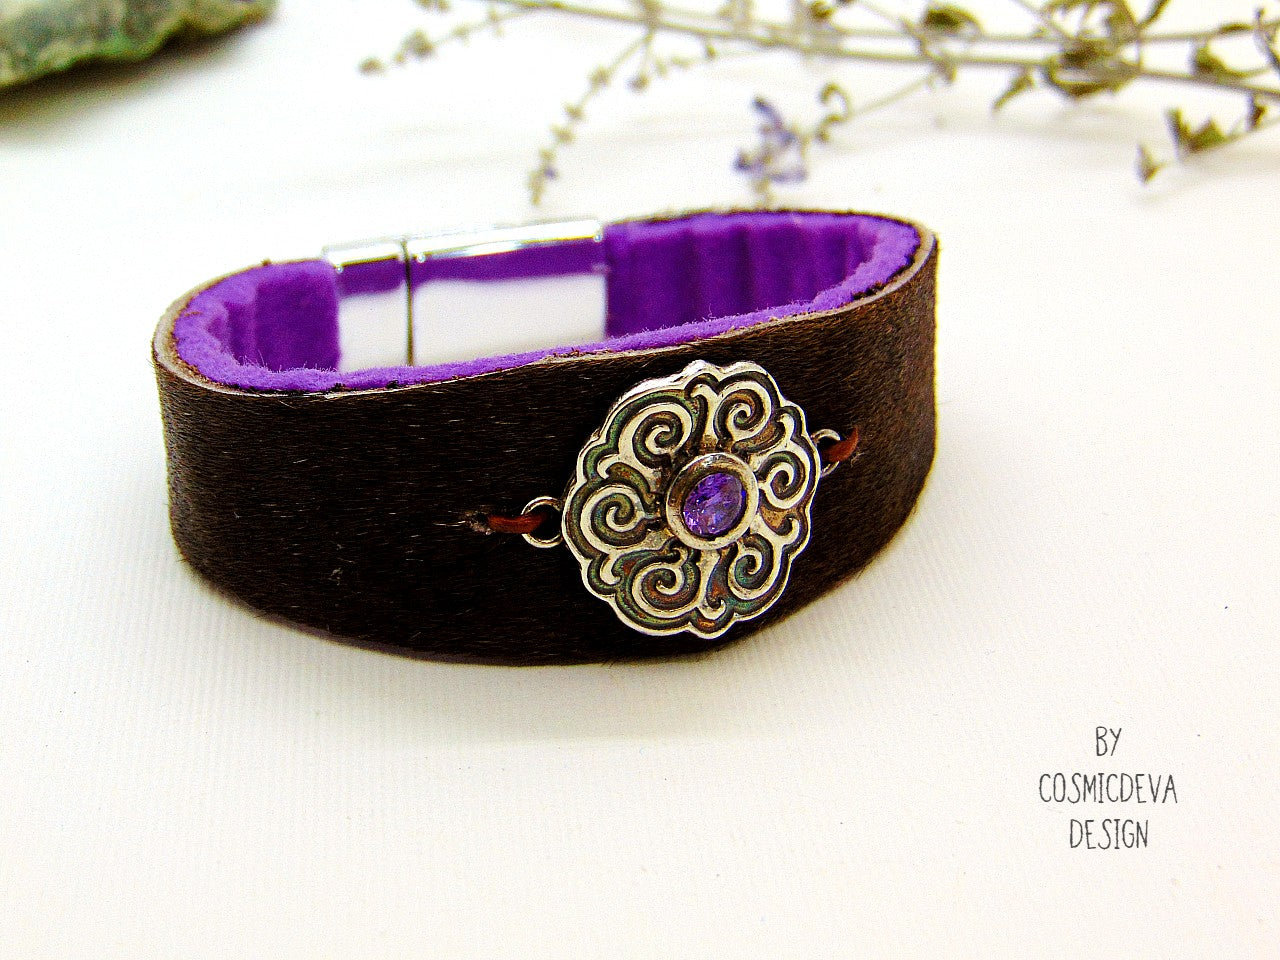 One of a kind handcrafted leather cuff bracelet made of hand cut earthy brown hair on cowhide leather. The focal point is a purple cubic zirconia amethyst in a bezel setting on a Celtic design textured solid 950 sterling silver disc. The inside of the leather bracelet is lined light purple/ lilac felt for your comfort. The handmade bracelet has silver colored stainless steel magnetic clasp which makes it easy to open and close.